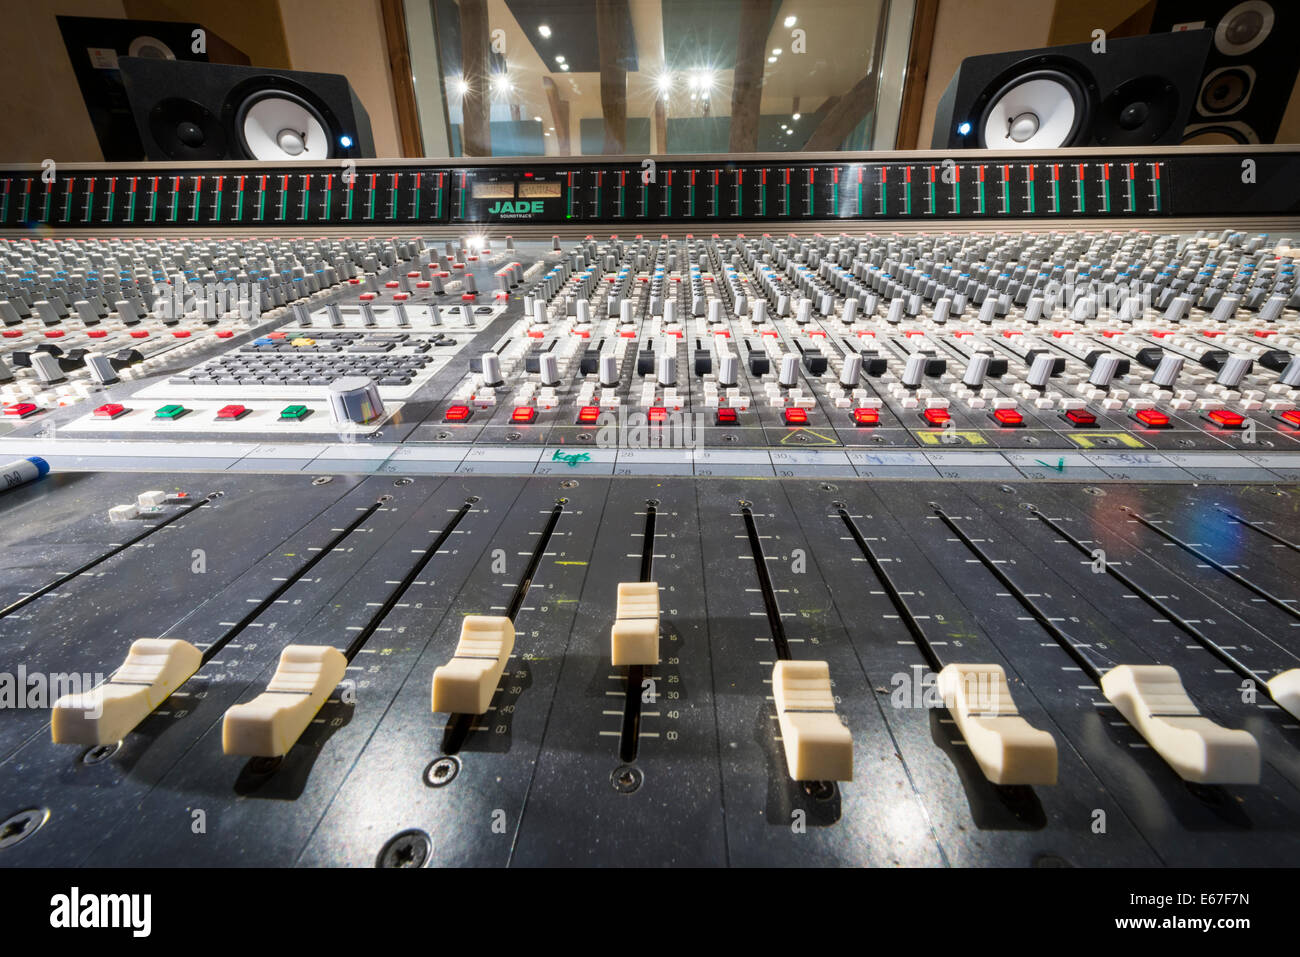 Wide angle view of sliders on a music recording mixing desk Stock Photo